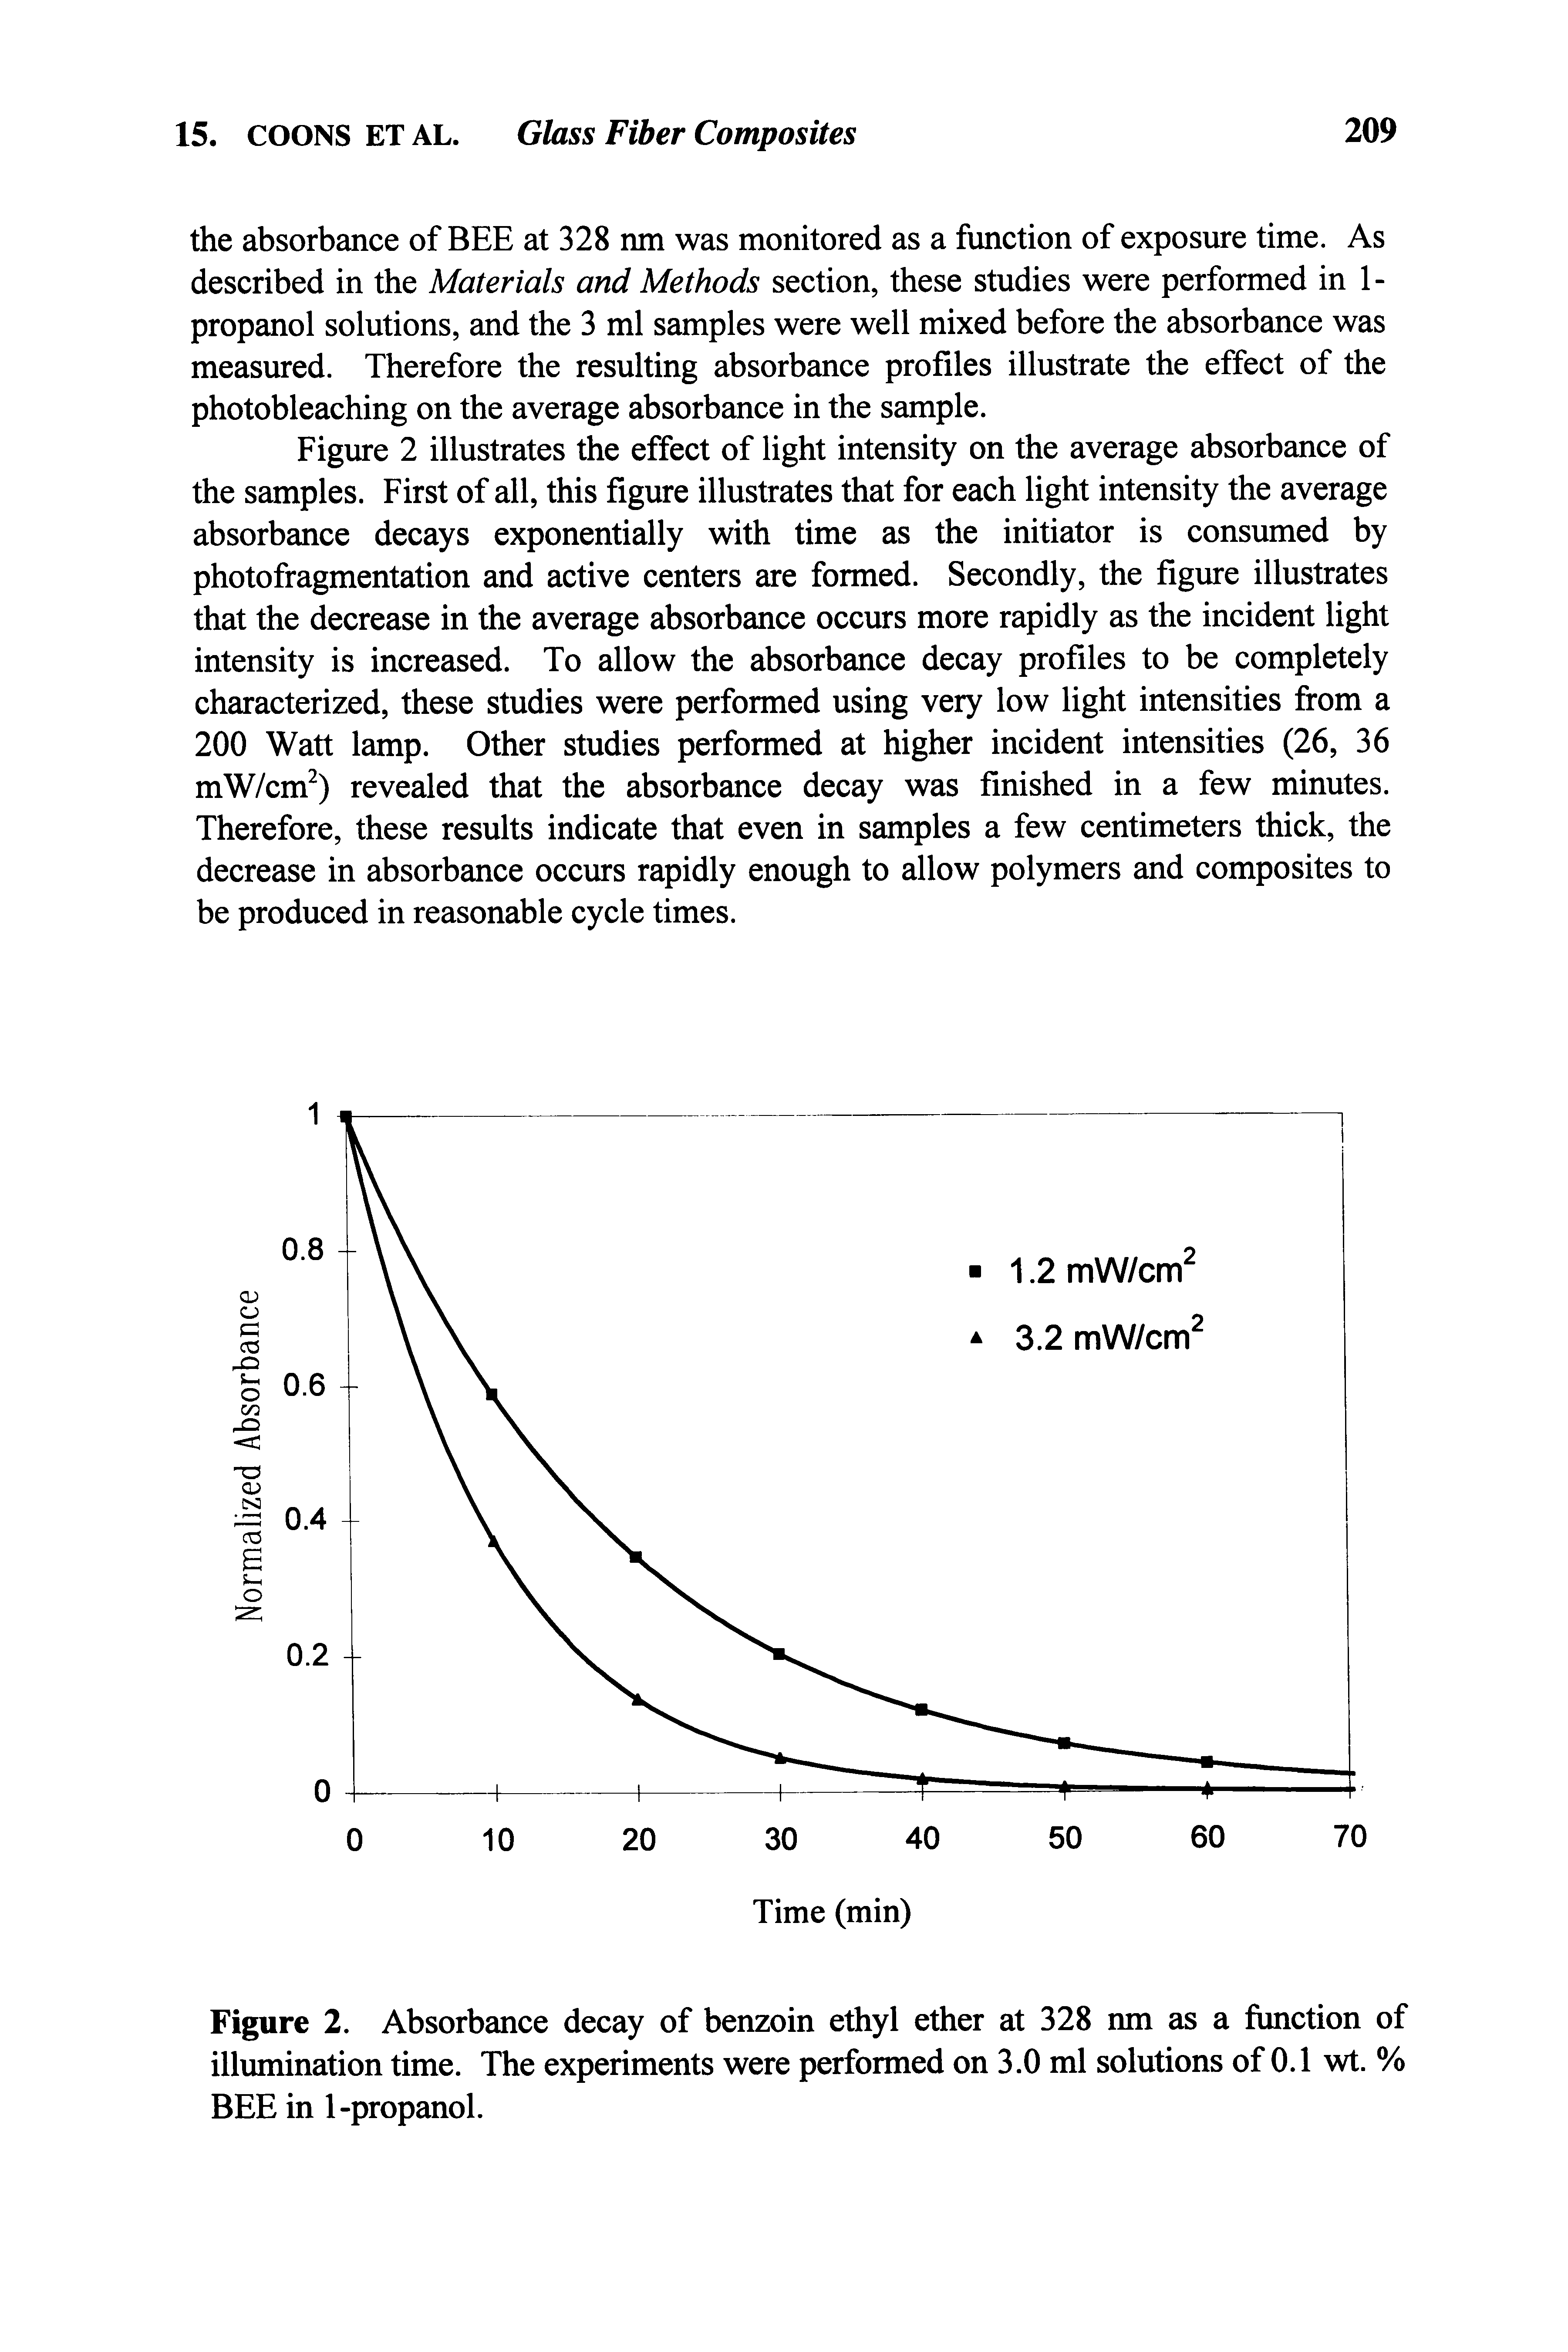 Figure 2. Absorbance decay of benzoin ethyl ether at 328 nm as a function of illumination time. The experiments were performed on 3.0 ml solutions of 0.1 wt. % BEE in 1-propanol.